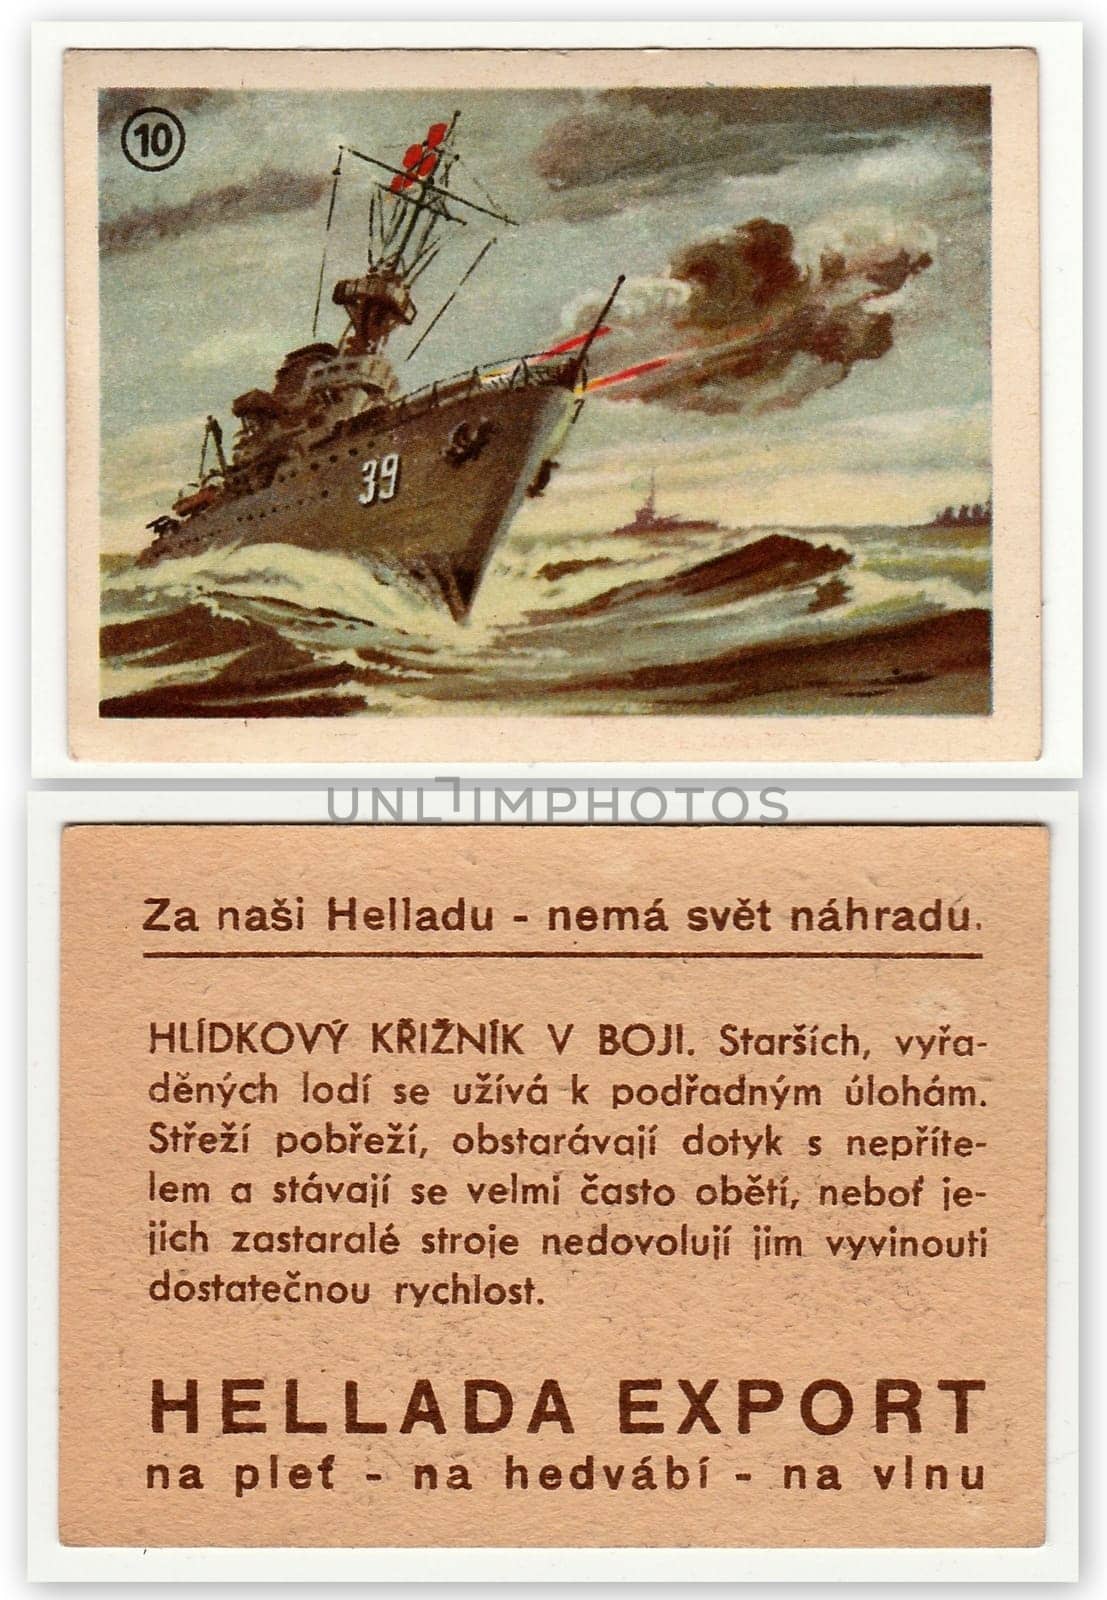 Vintage advertising card. Retro advert is for "Hellada" - famous producer of laundry soap. by roman_nerud